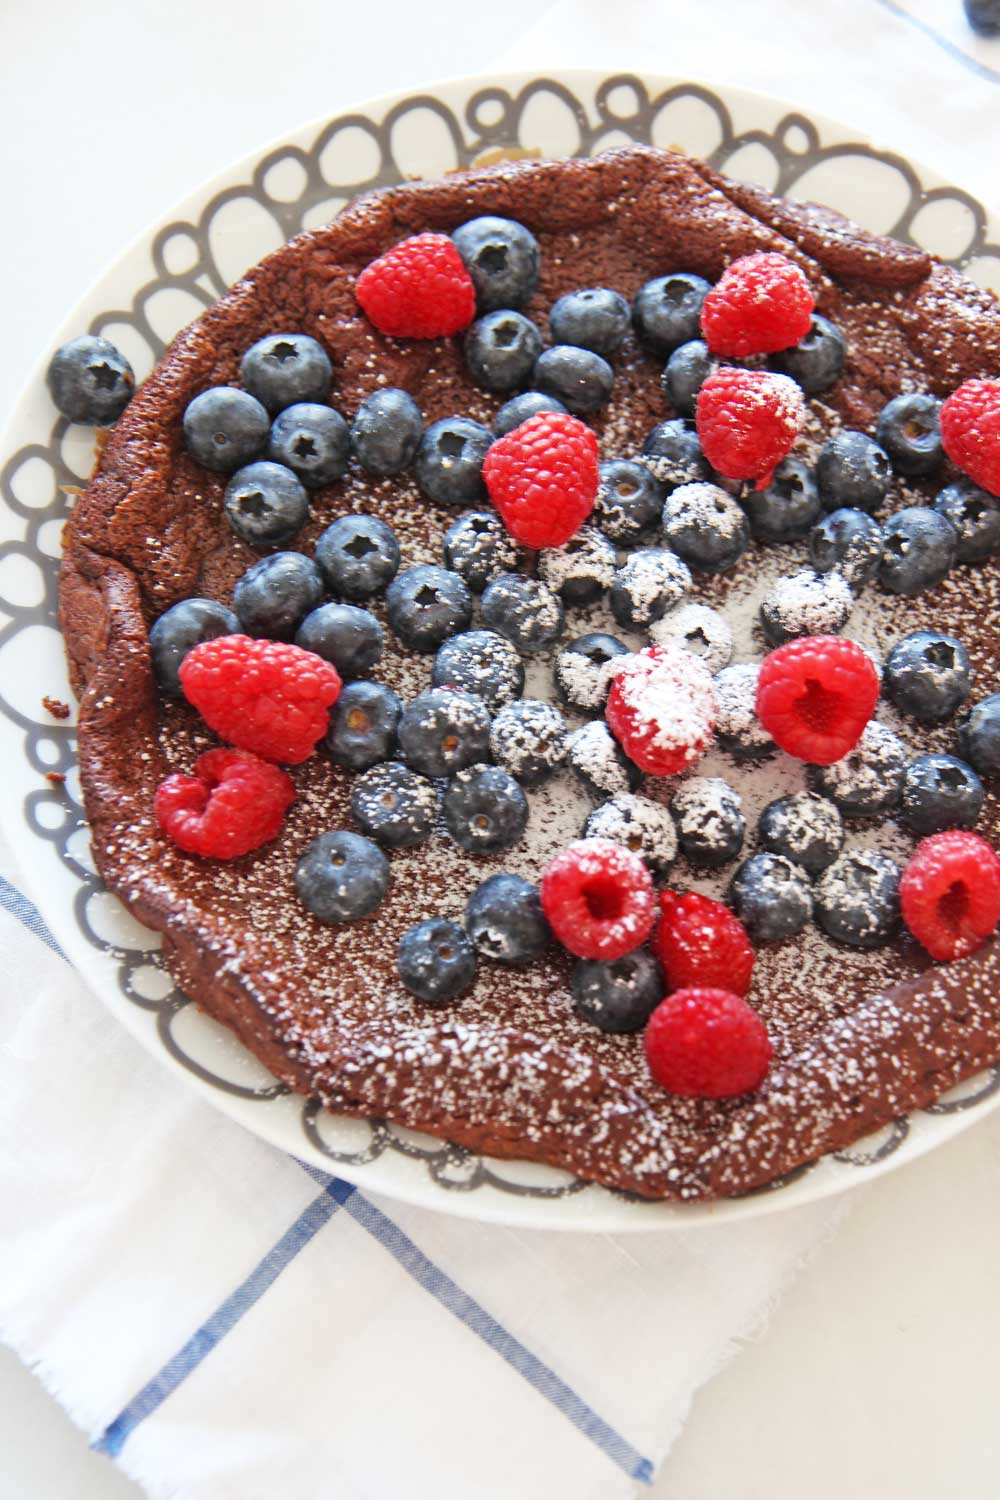 How To Make a Flourless Chocolate Tart. This is an easy recipe for beginners. Just grab chocolate, eggs, coffee, and butter. Perfect Passover dessert and gluten free dessert. Happy Baking! www.ChopHappy.com #Passoverdessert #glutenfreedessert